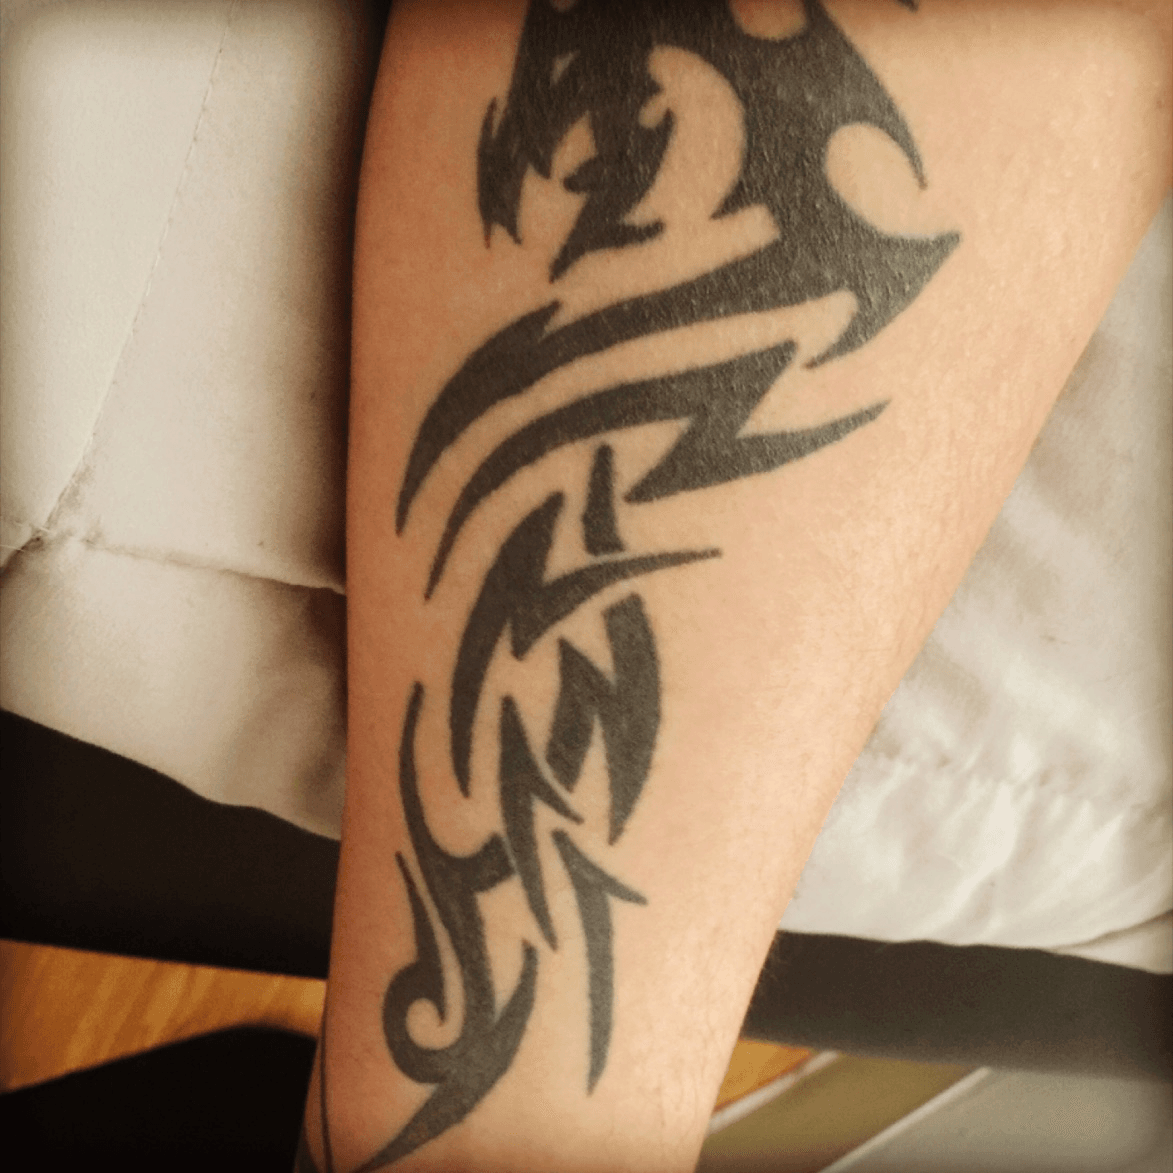 infamous second son tattoo